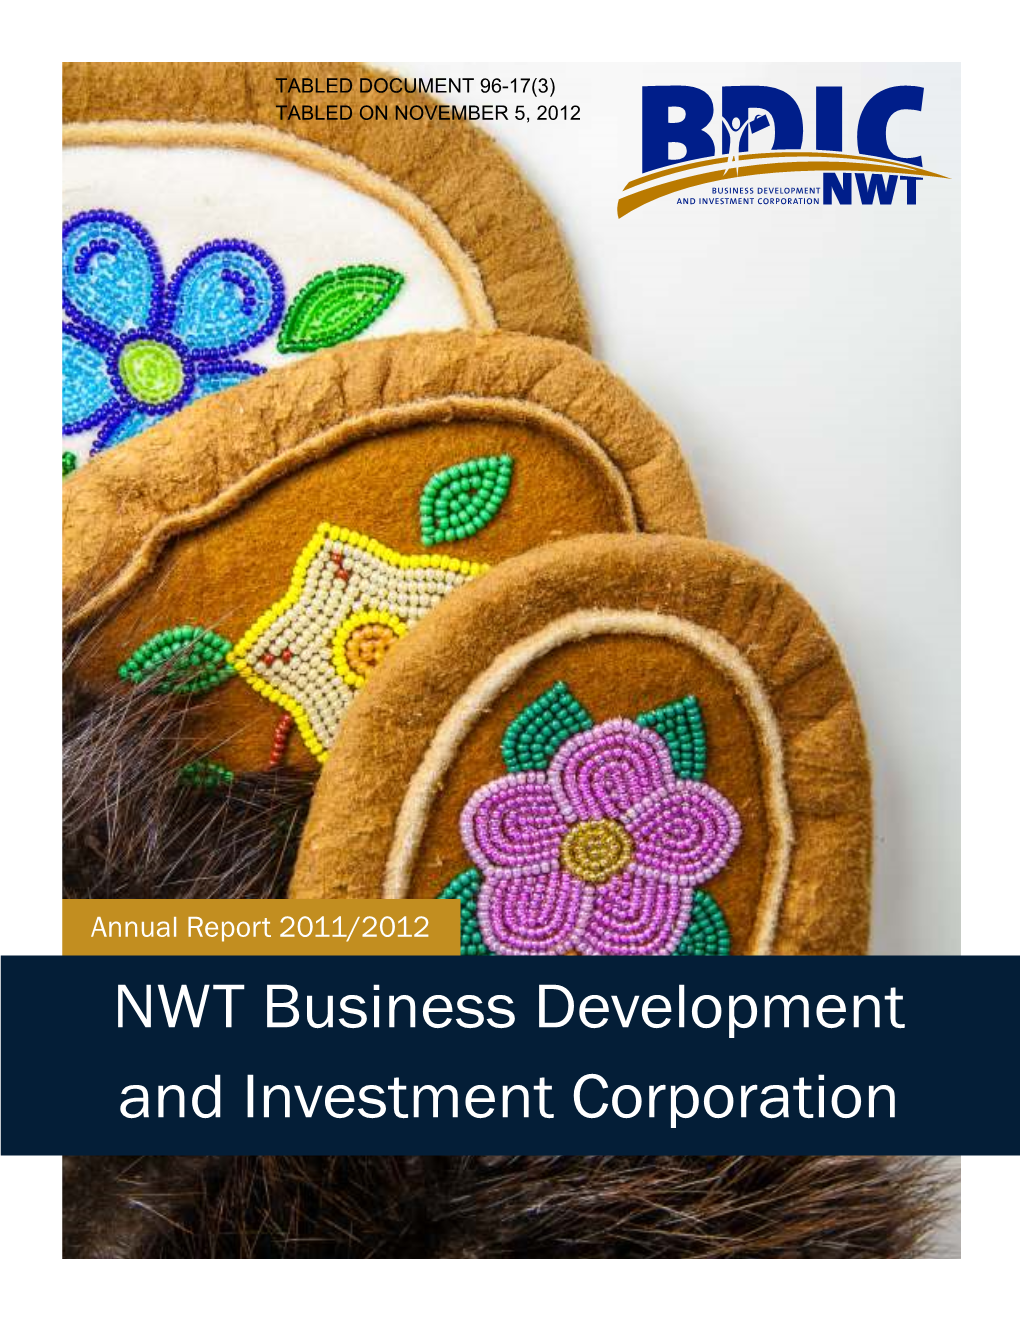 NWT Business Development and Investment Corporation